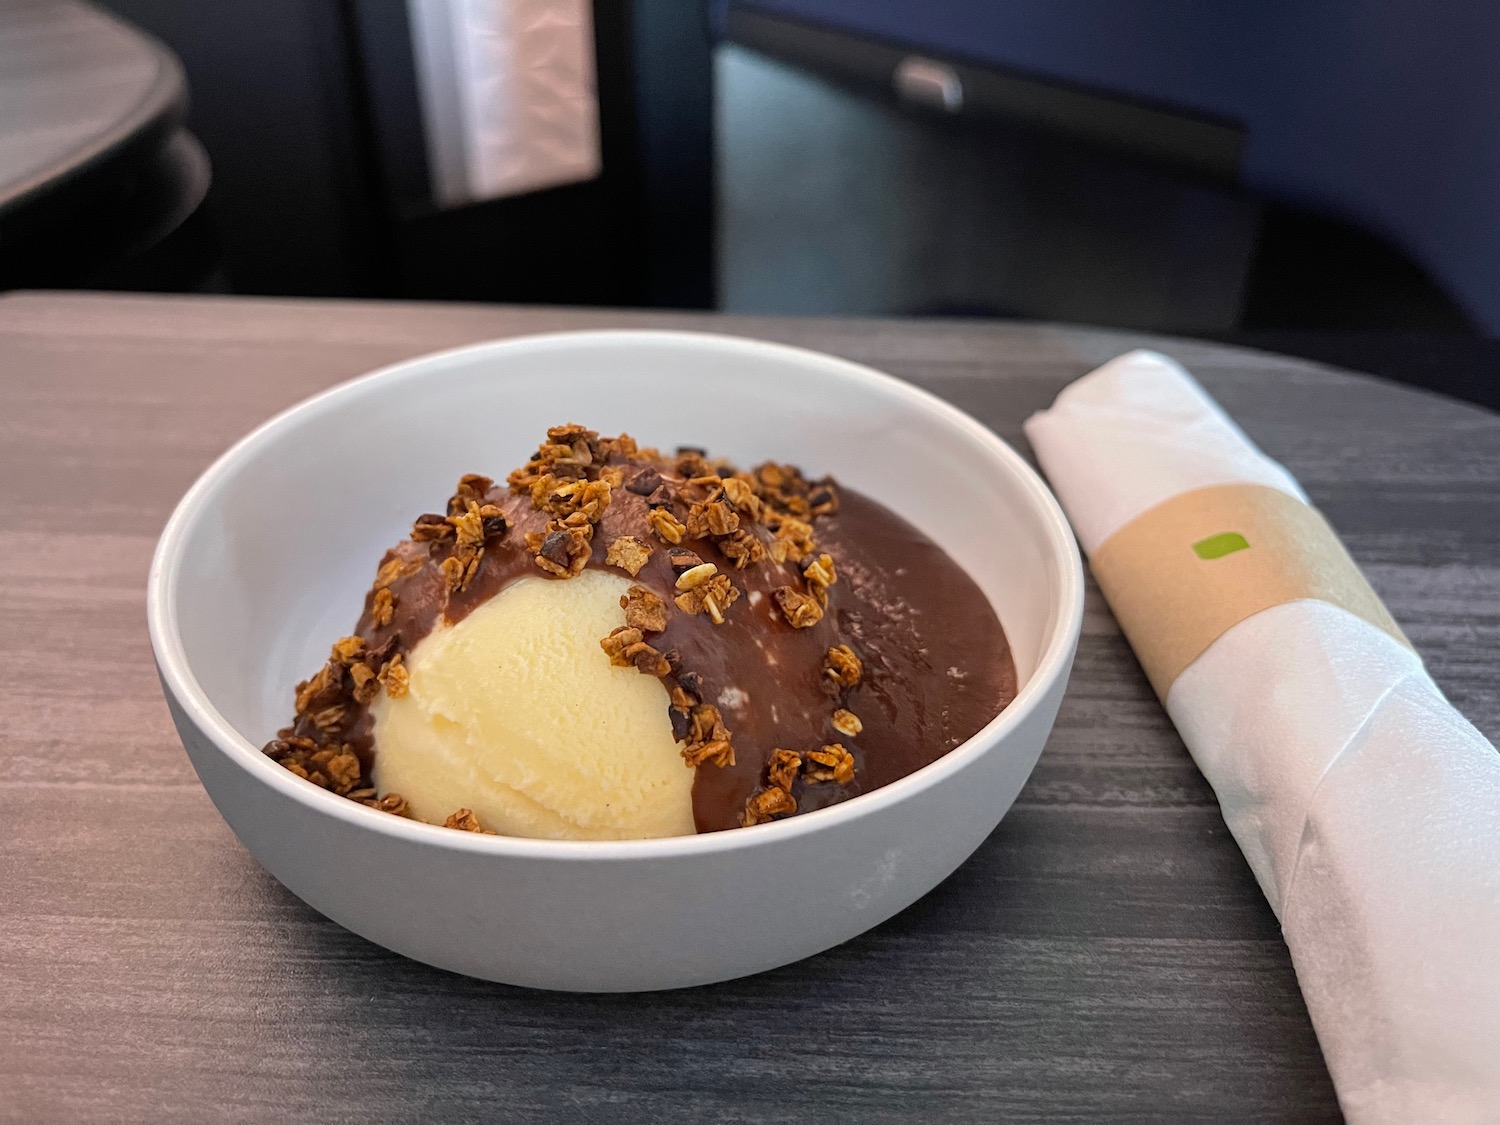 a bowl of ice cream with chocolate topping and a napkin